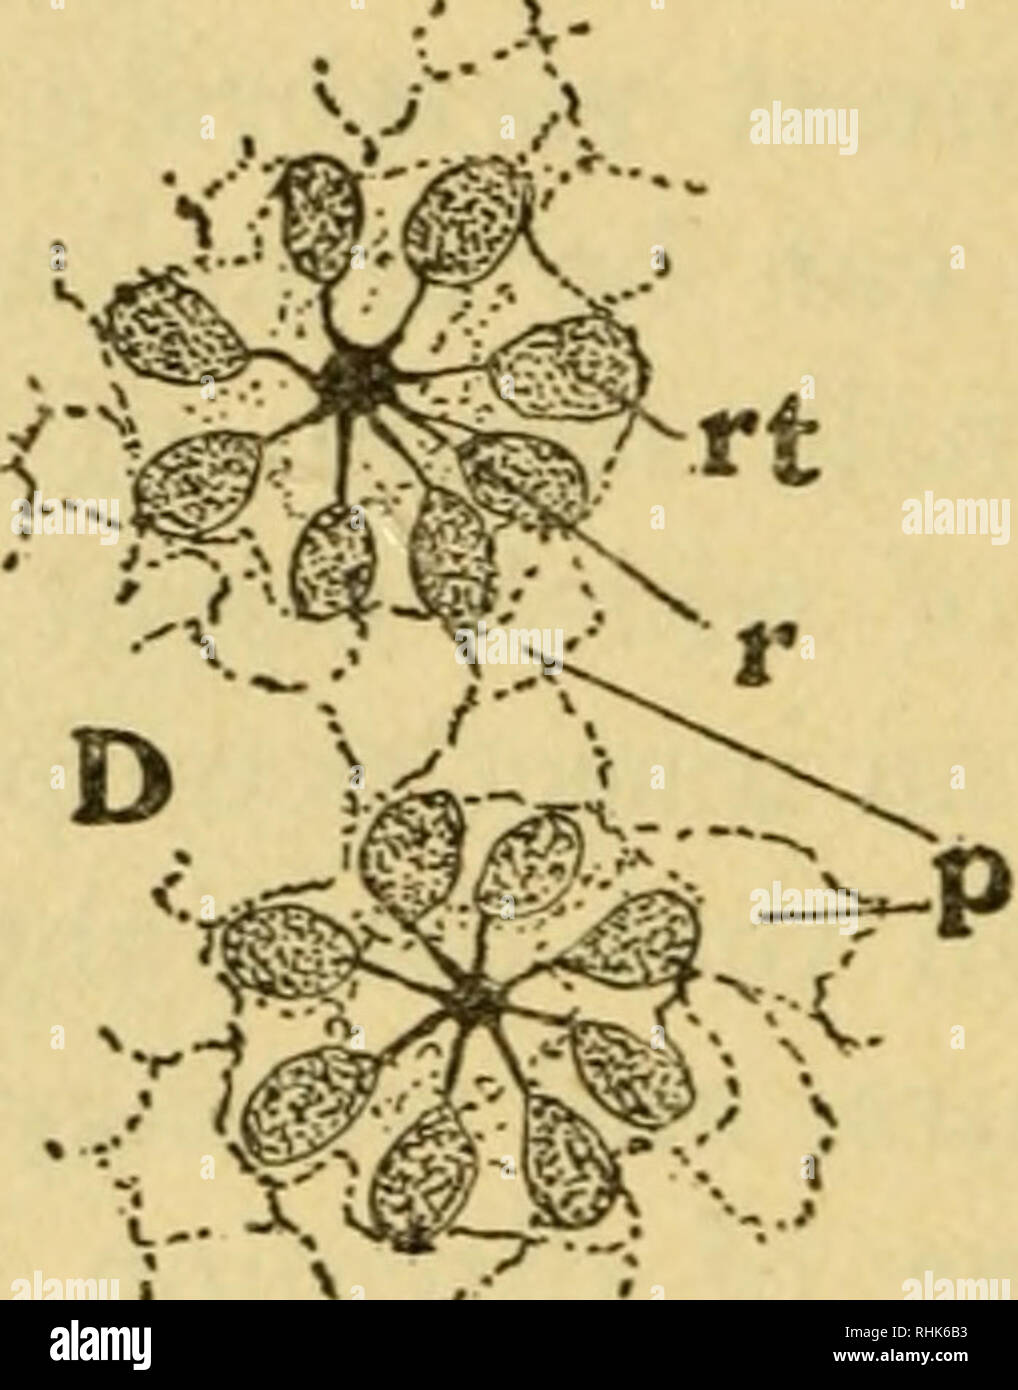 . The biology of insects. Insects -- Biology. Fig. 29.—Details of Ommatidia of Compound Eye of Honey Bee, A, Longitudinal section of an ommatidium ; B, Surface view; C, Oblique transverse section through apices of cones and outer region of retinulae ; D, Transverse section through retinulae and rhabdoms. cr, corneal facet and lens ; c, crystalline cone ; r, rhabdom ; rt, retinula ; /&gt;, pigment cells ; «, nerve-fibre. A and B X 450. C and D X 1000. After E. F. Phillips. membrane of the eye and passes on towards the optic ganglion. Each series of lens, crystalline cone, rhabdom. Please note t Stock Photo